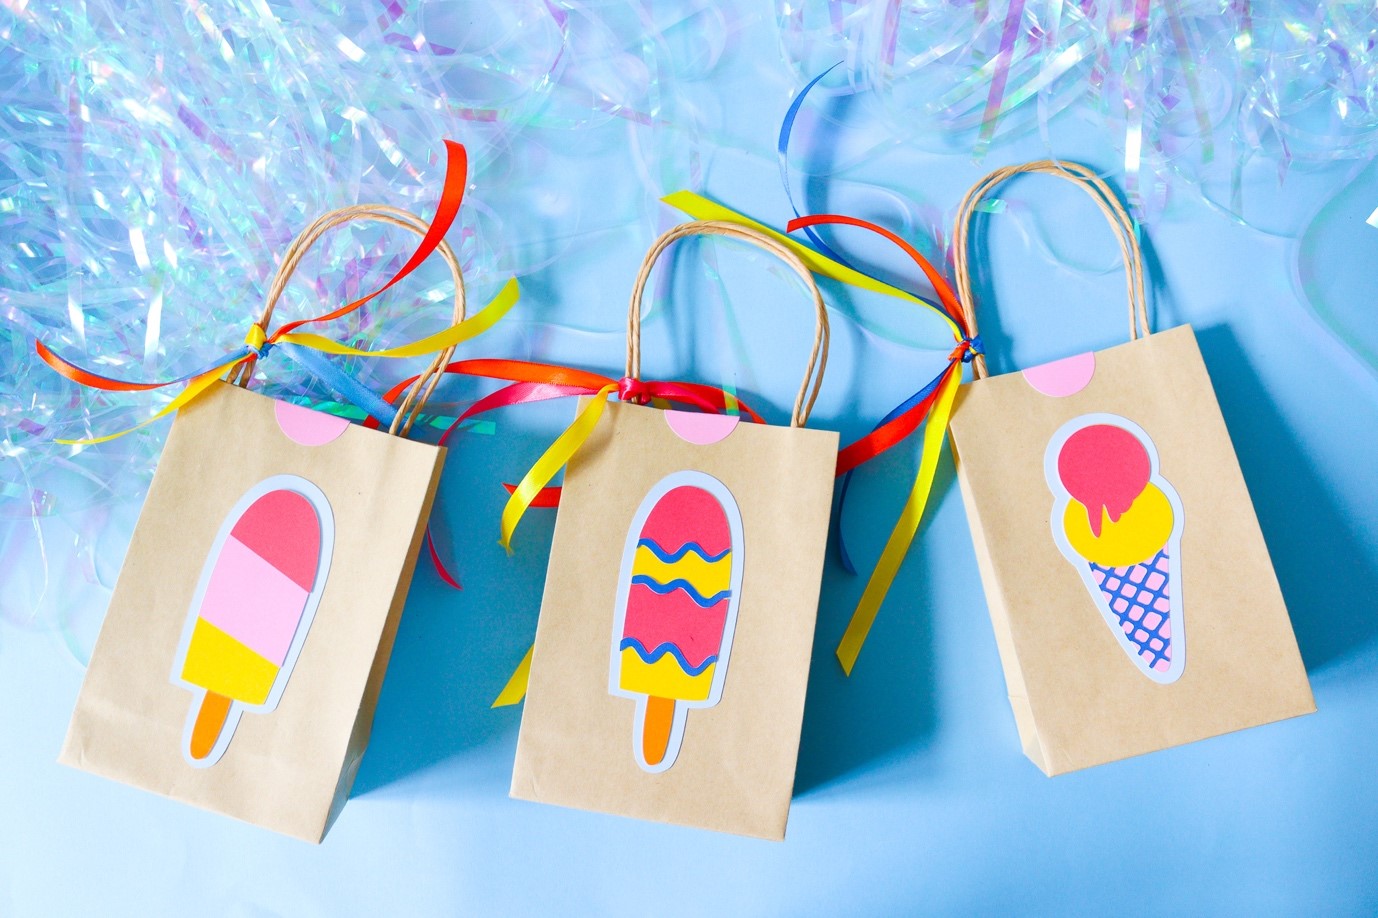 Inspiration for your Explore 3 – Ice cream party bags